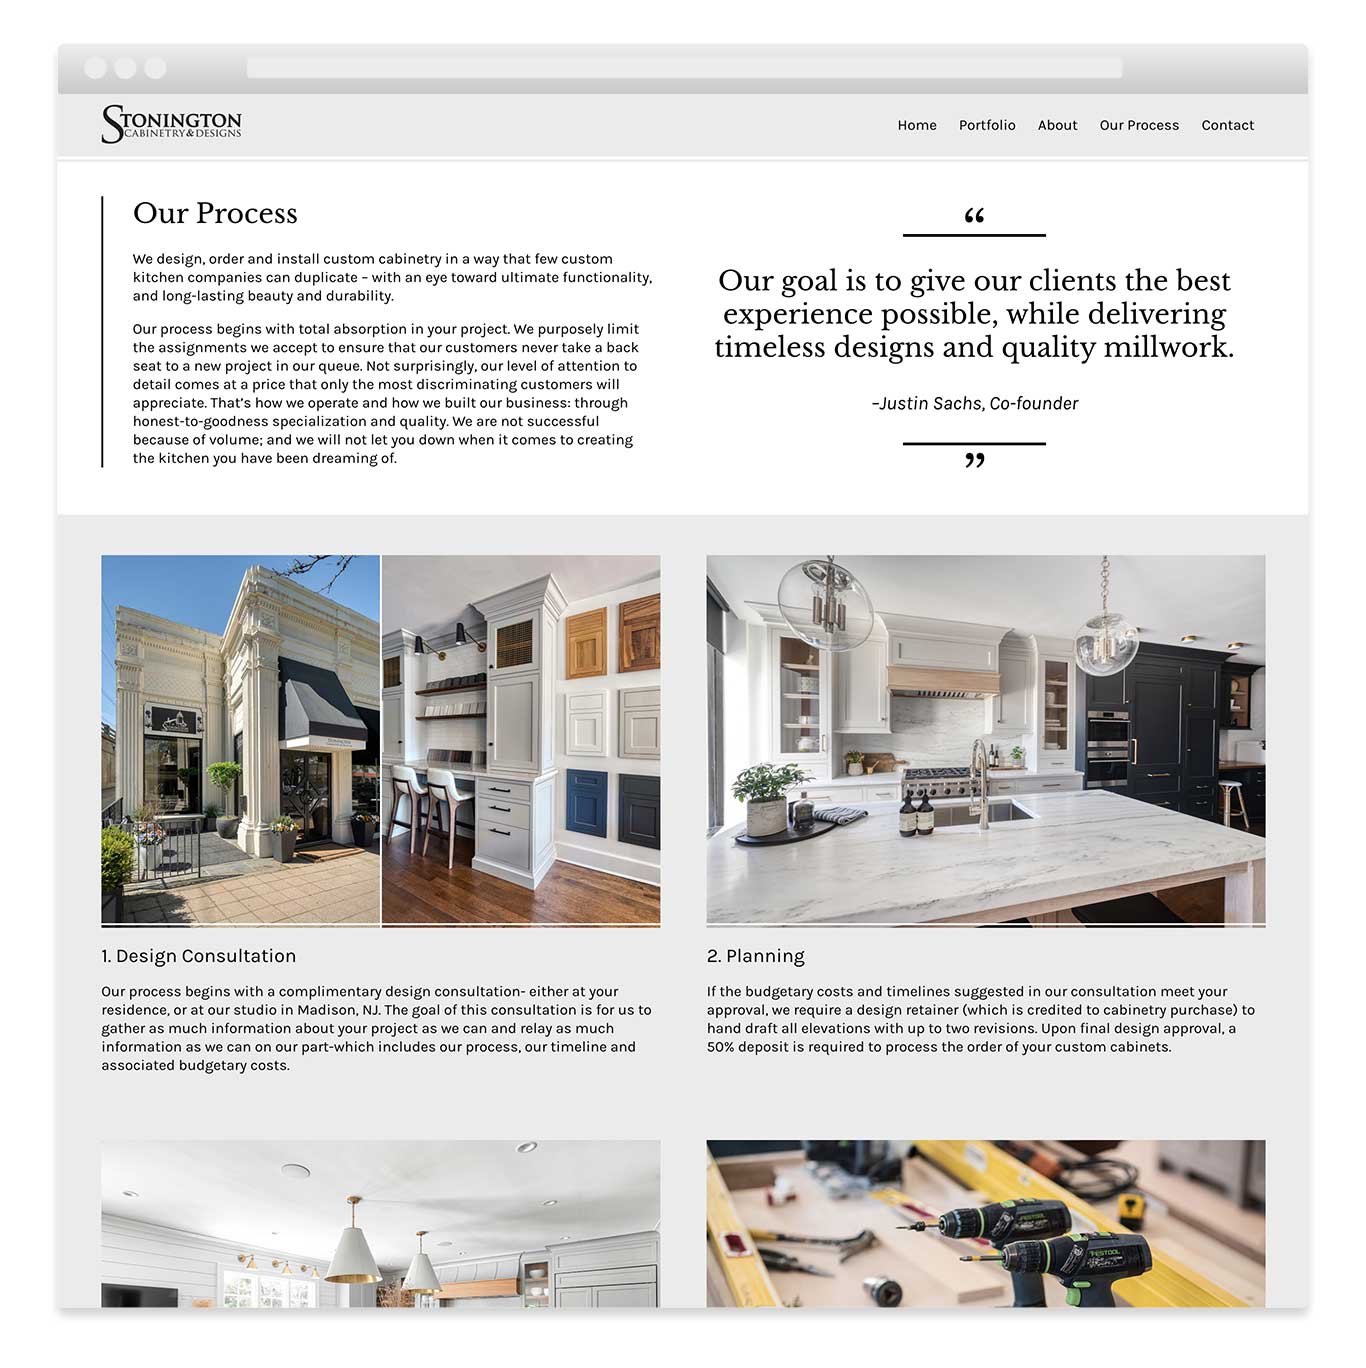 Our Process webpage of WordPress interior design website design for Stonington Cabinetry in New Jersey.